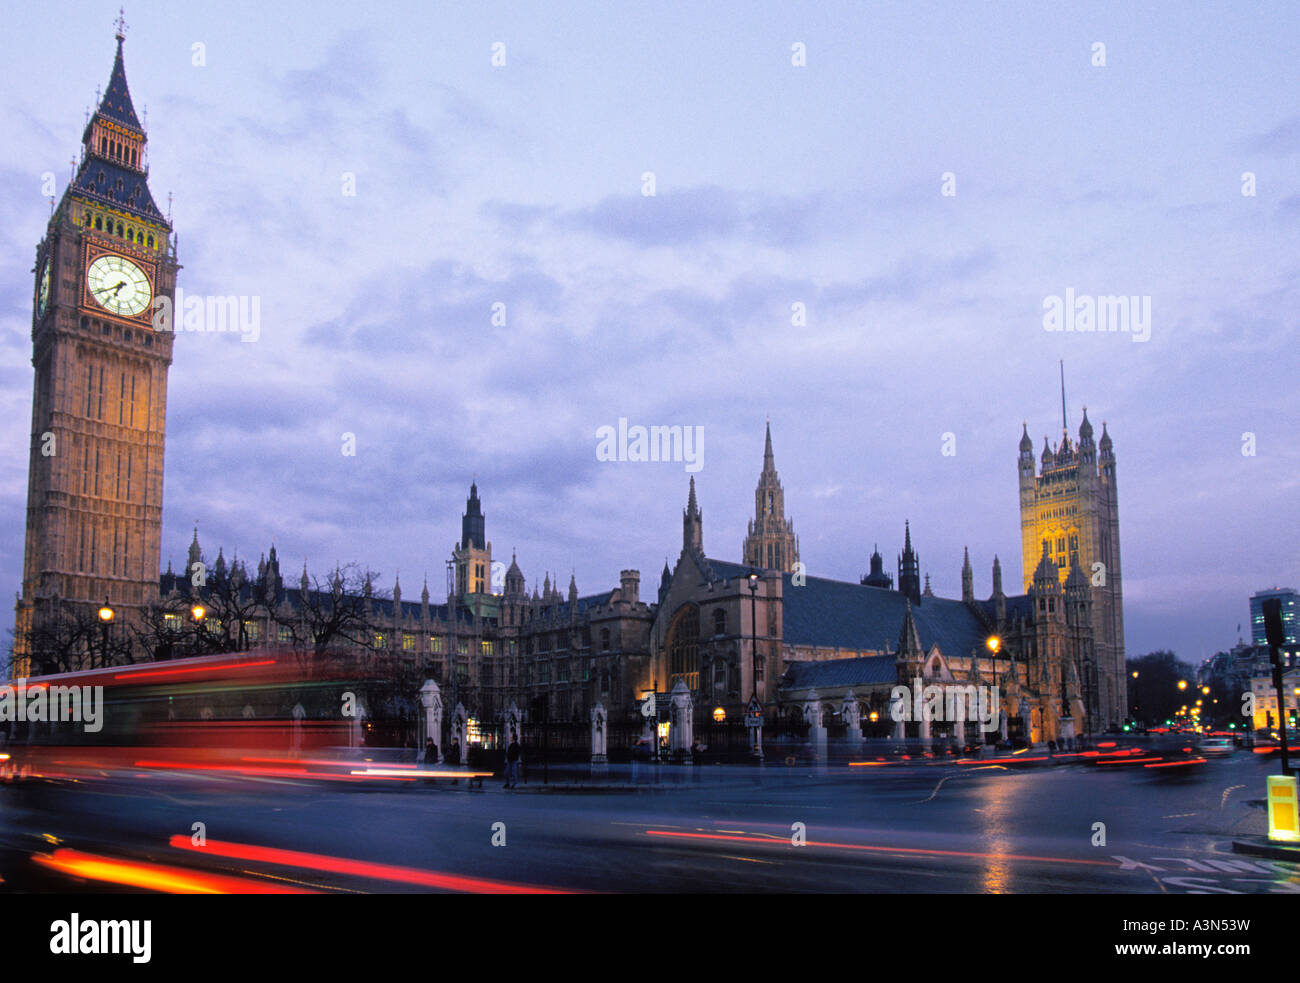 London United Kingdom Great Britain England Big Ben and Houses of Parliament. Parliament Square West End Westminster. UNESCO world heritage site. Stock Photo